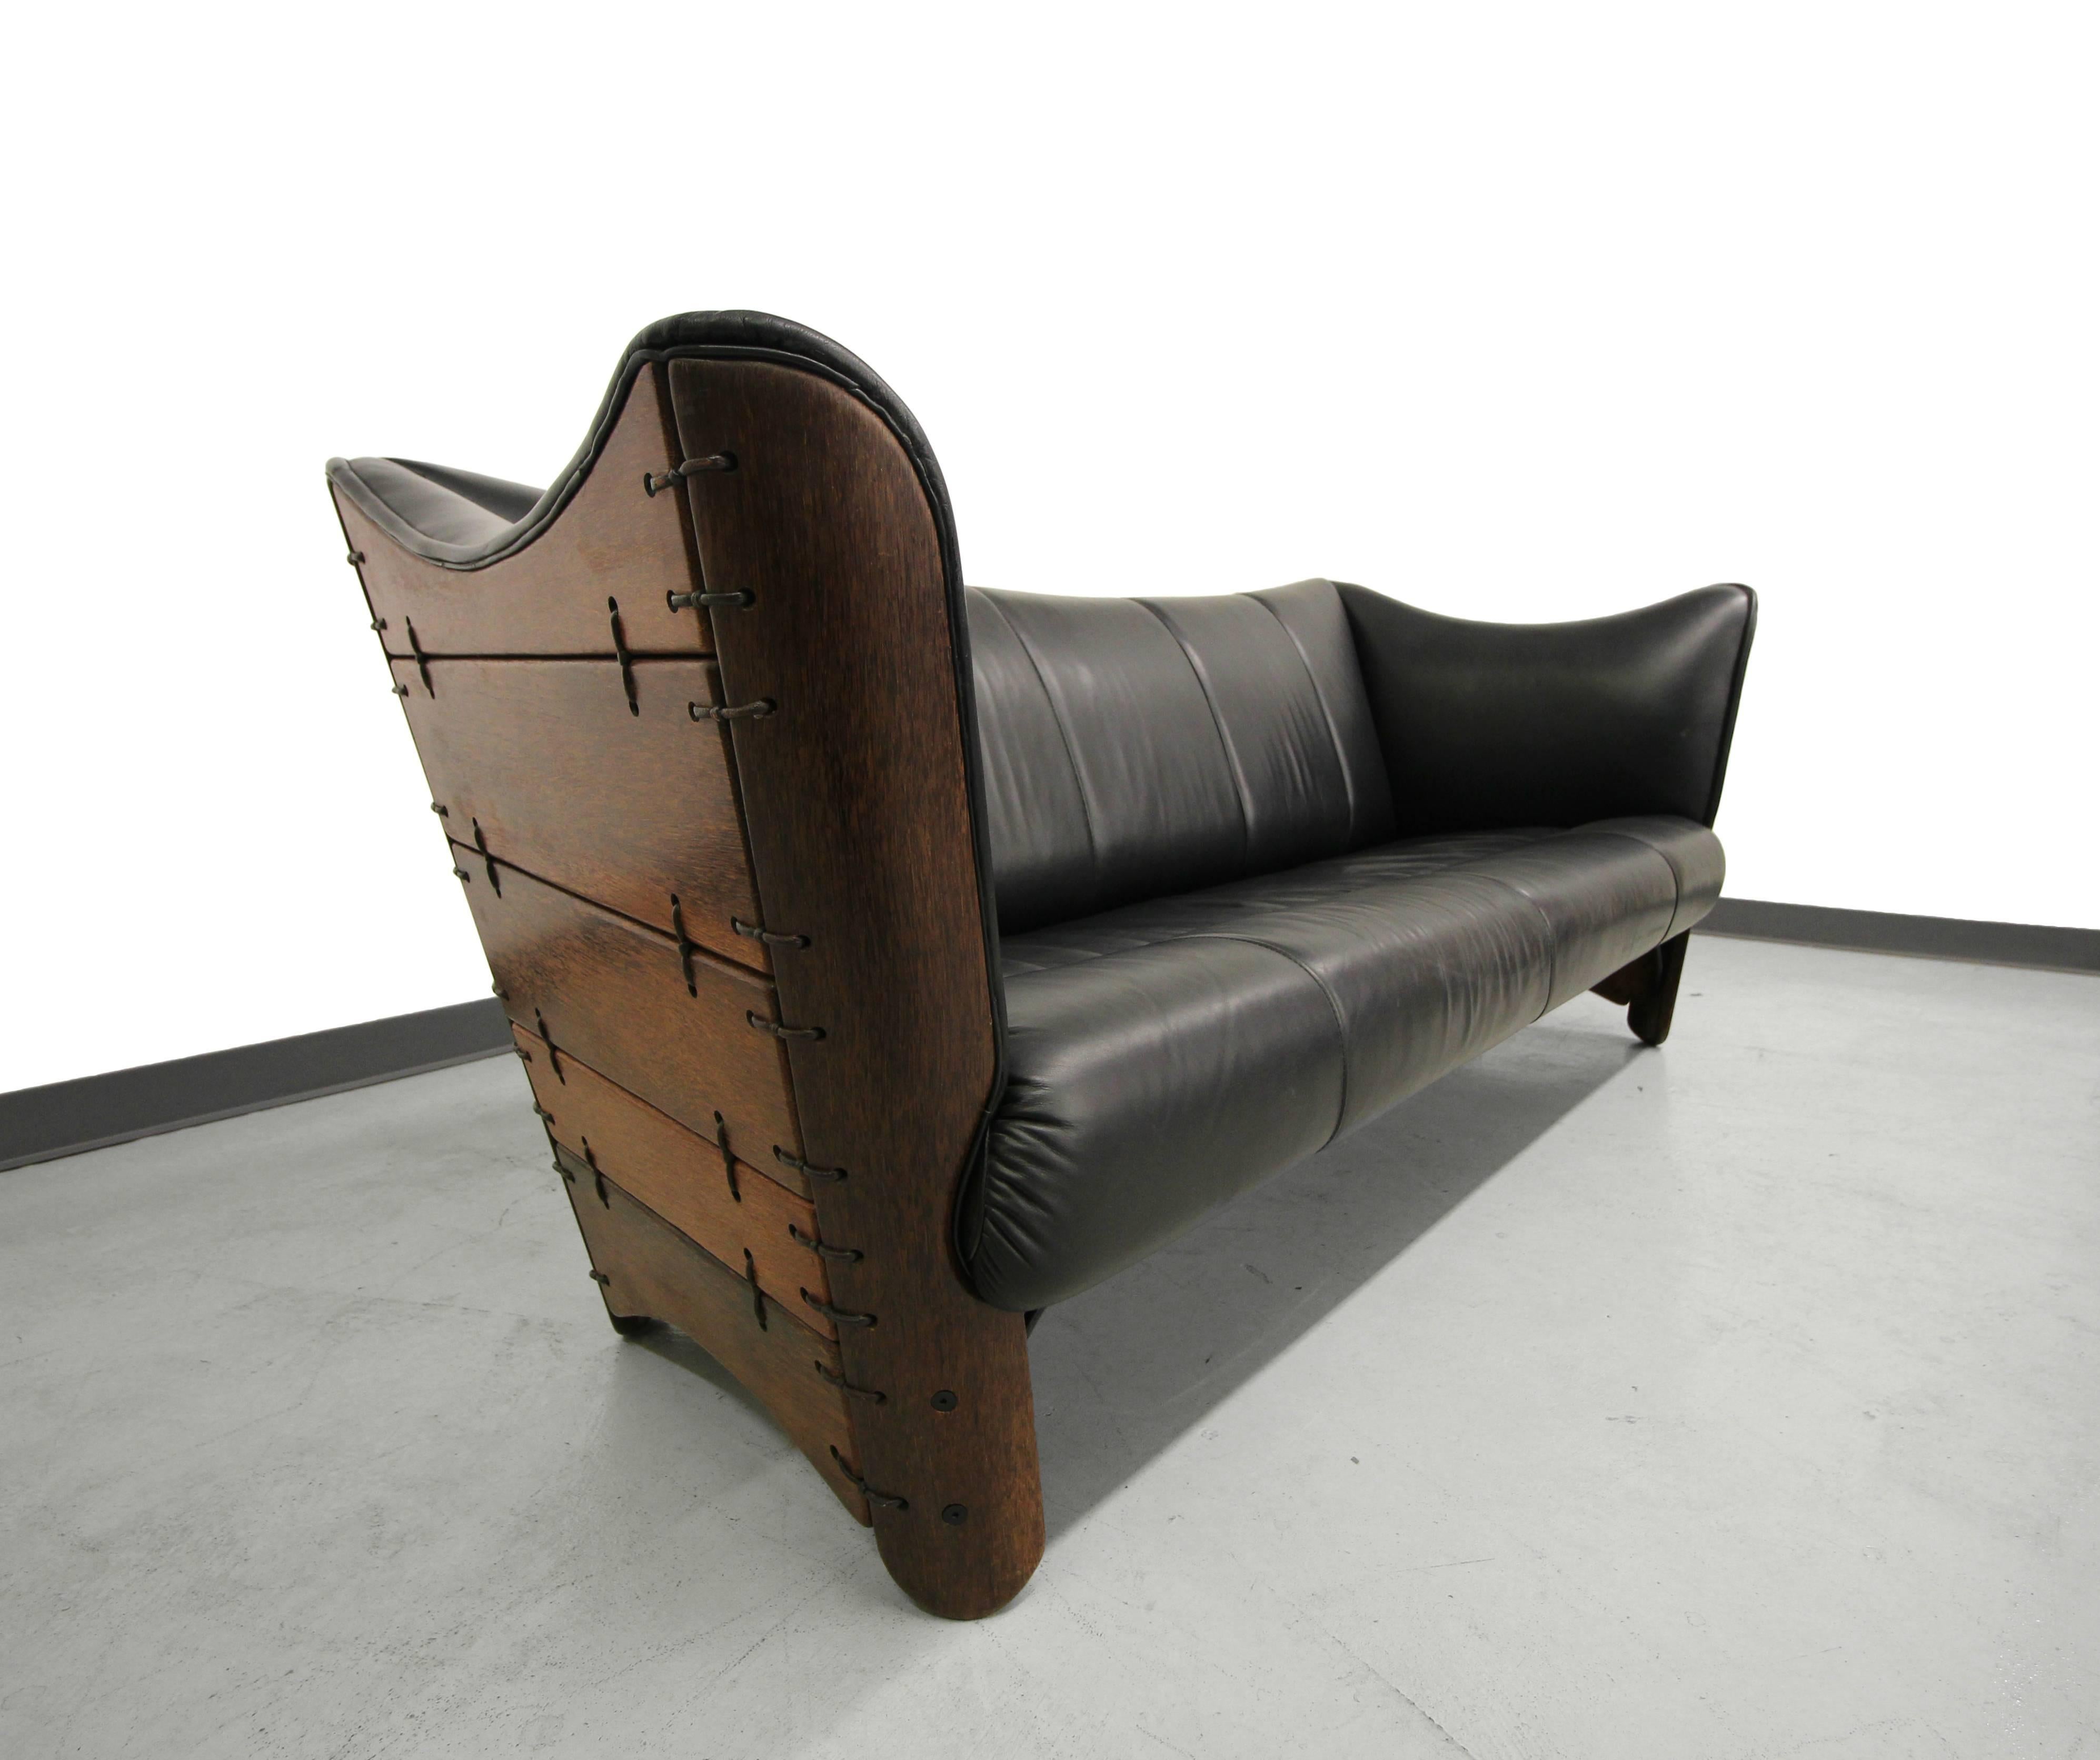 Pacific Green Palmwood and Leather Cayenne Sofa 1